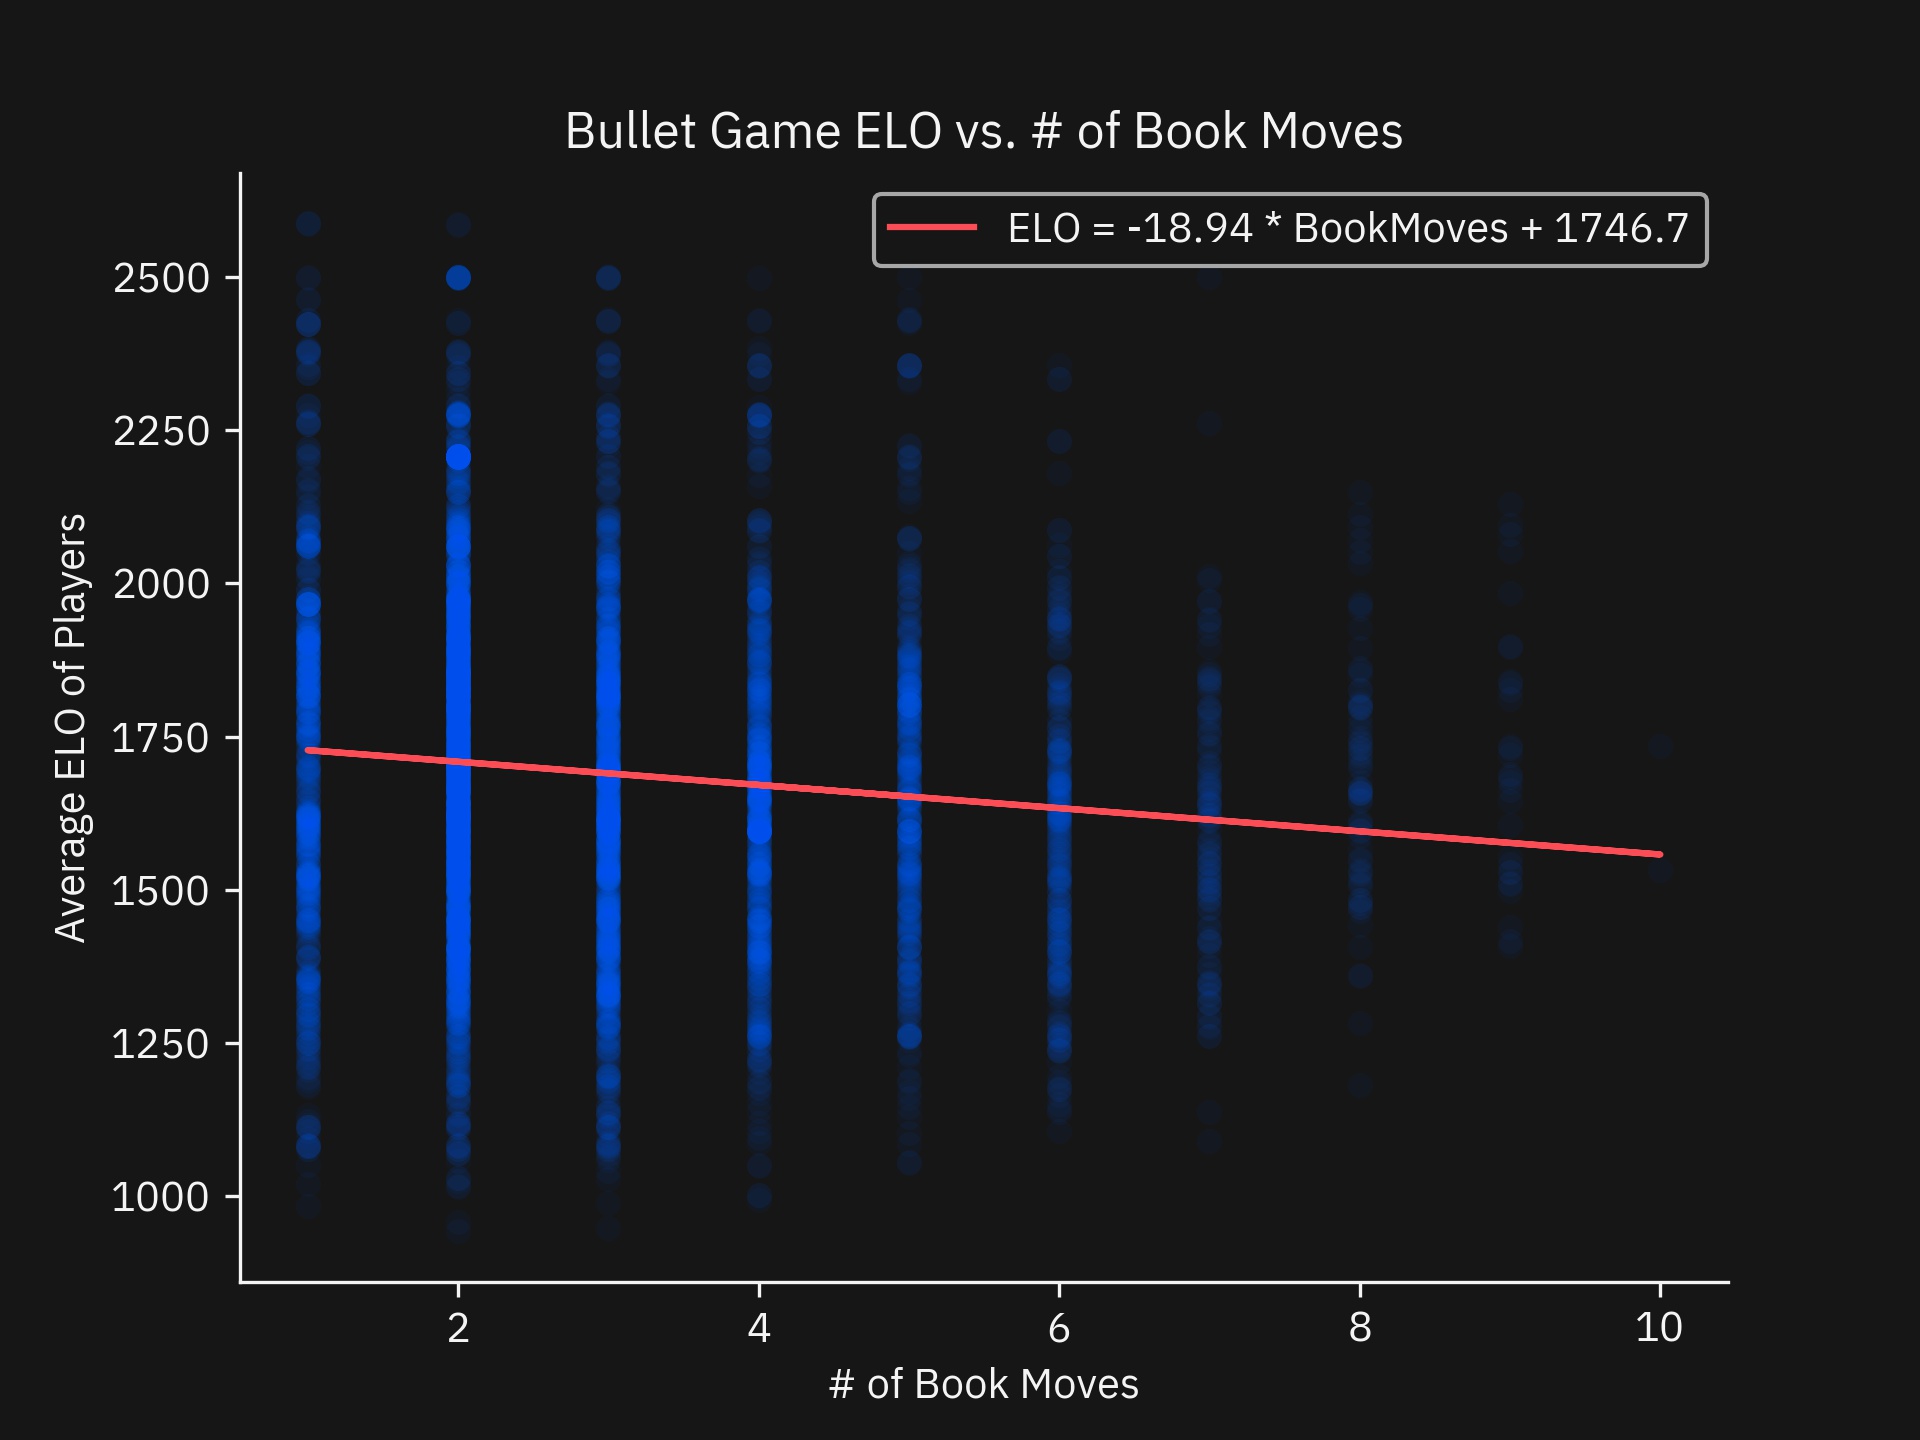 Scatter plot of Average Player ELO vs number of Book moves featured for Bullet games